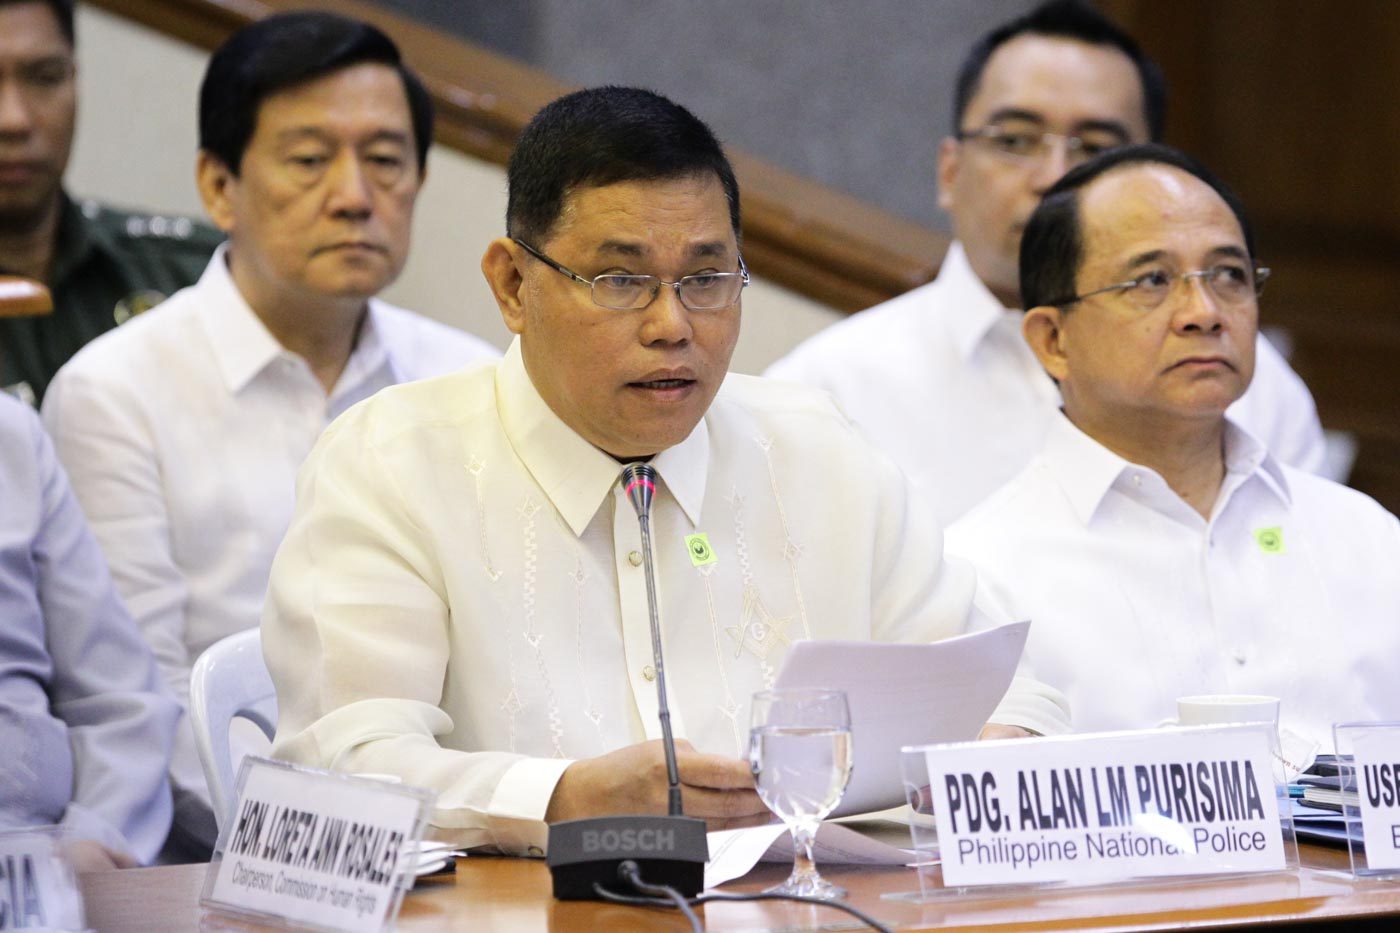 Police probers: Purisima acted without authority